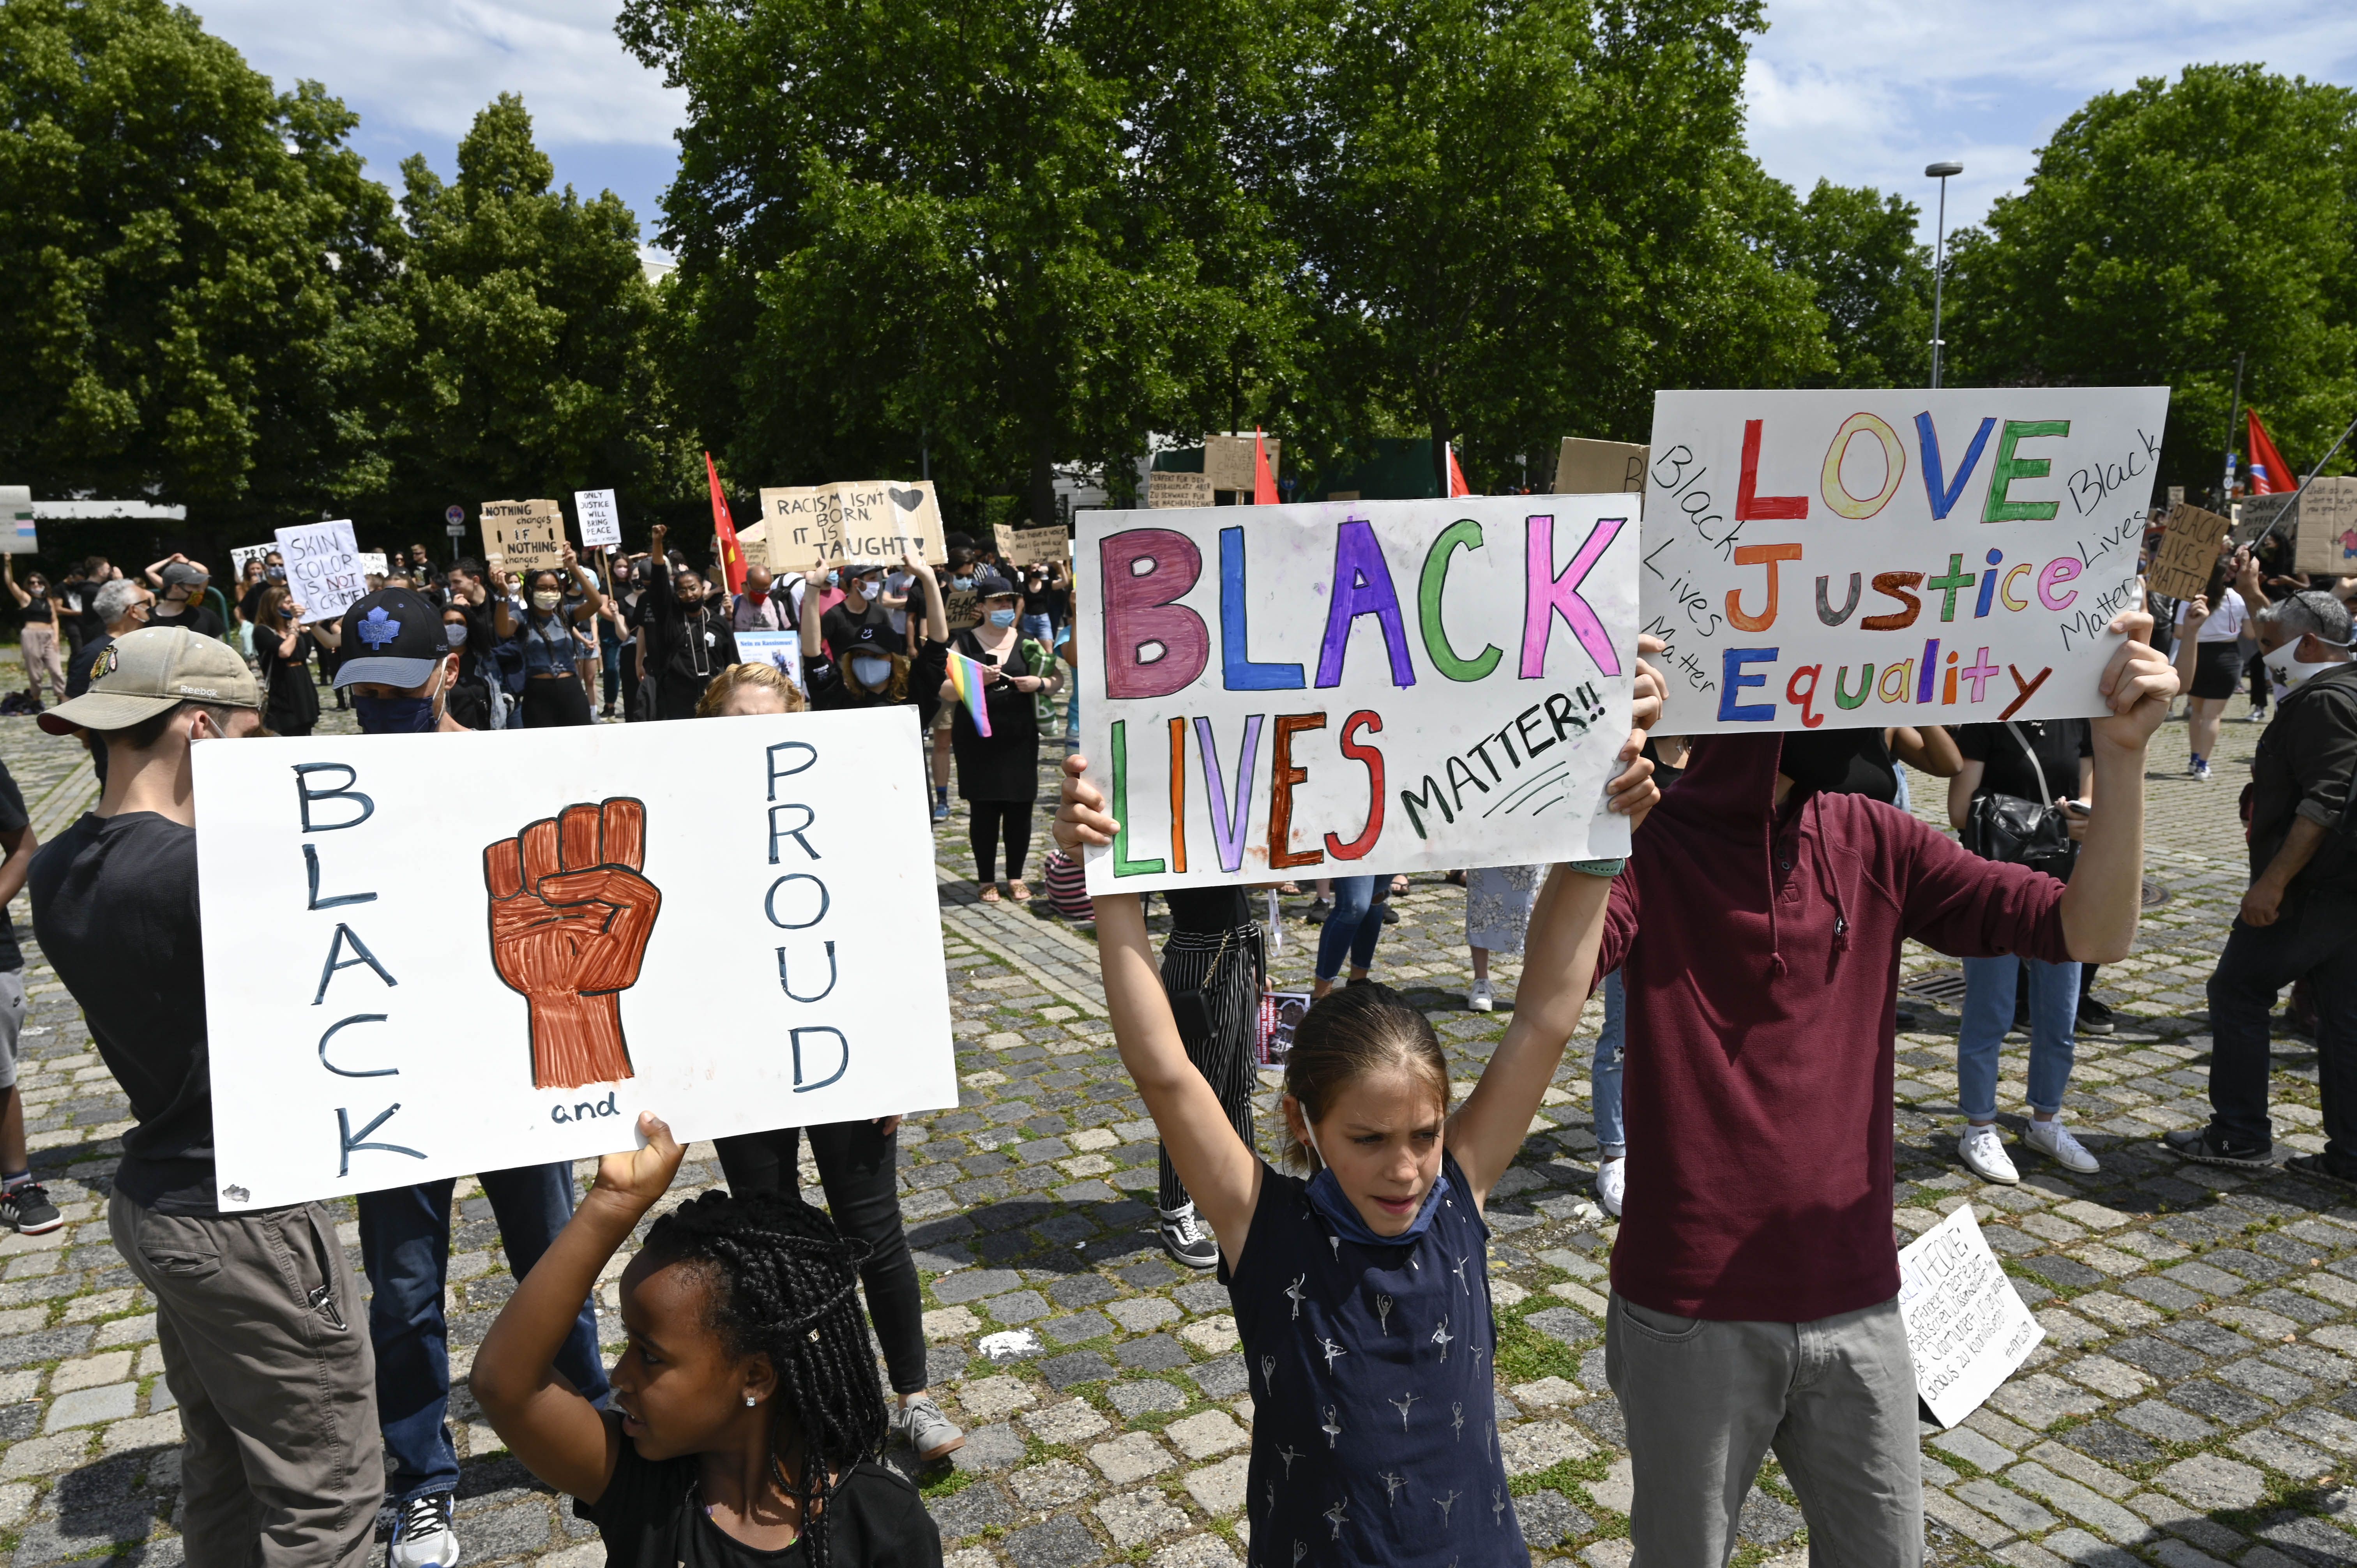 Children hold three signs that read "Black and Proud," "Black Lives Matters" and "Love Justice Equality"